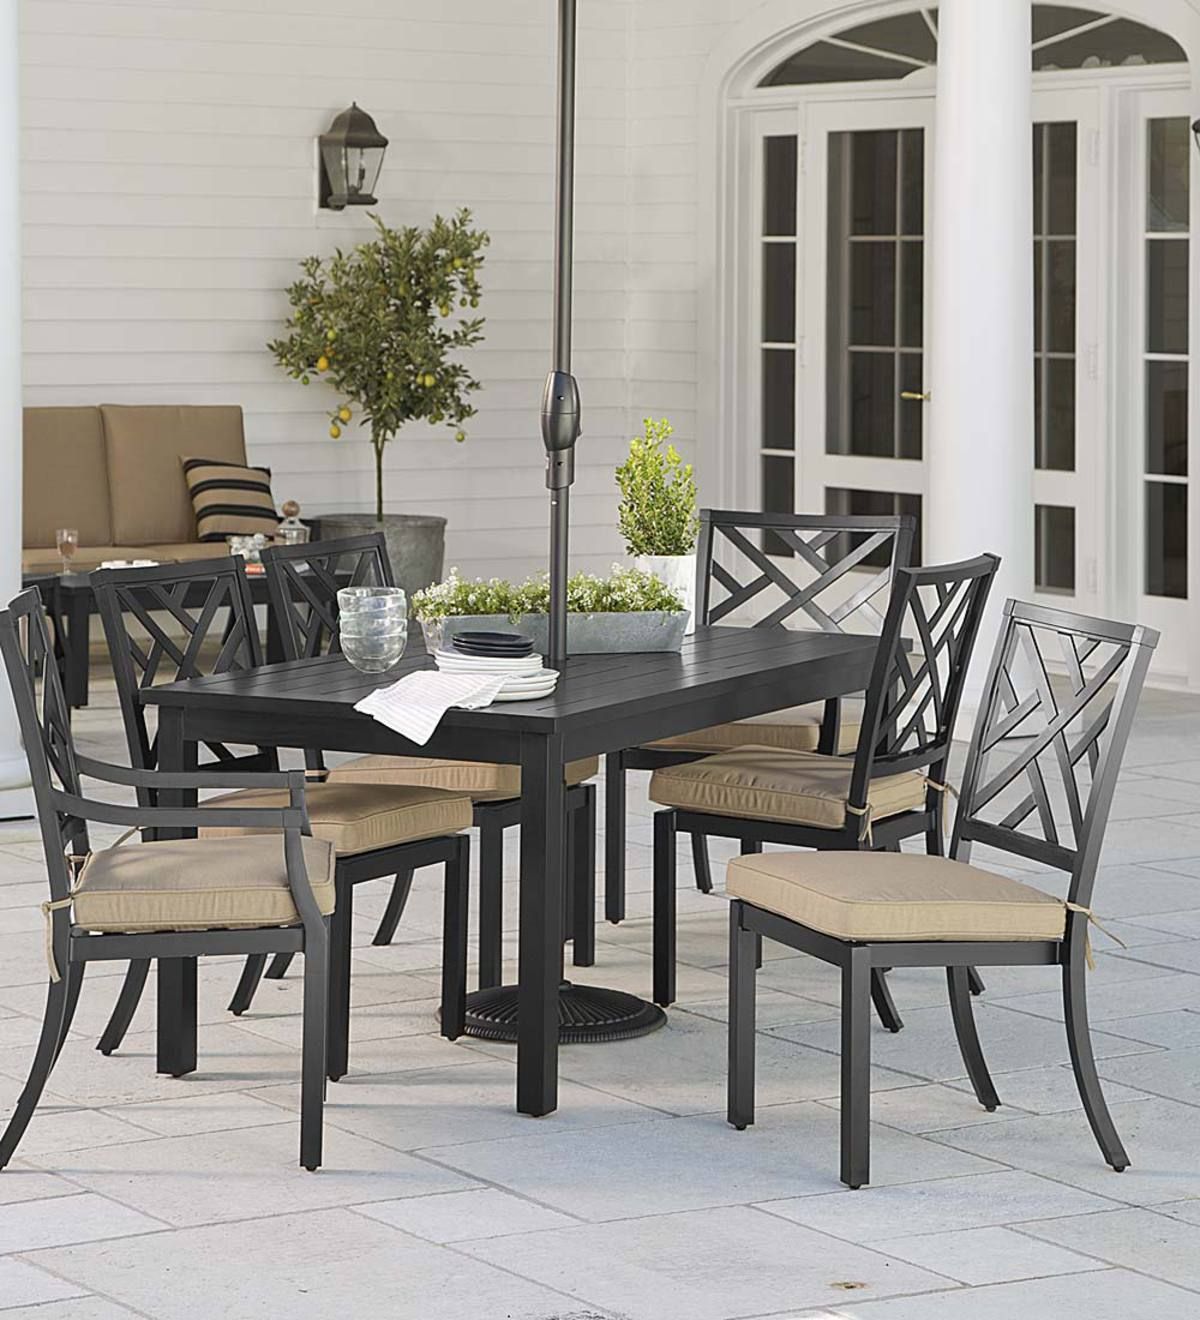 Off White Cushion Patio Dining Sets Within Newest Chippendale Outdoor Dining Set With Cushions – Black With Heather Beige (View 14 of 15)